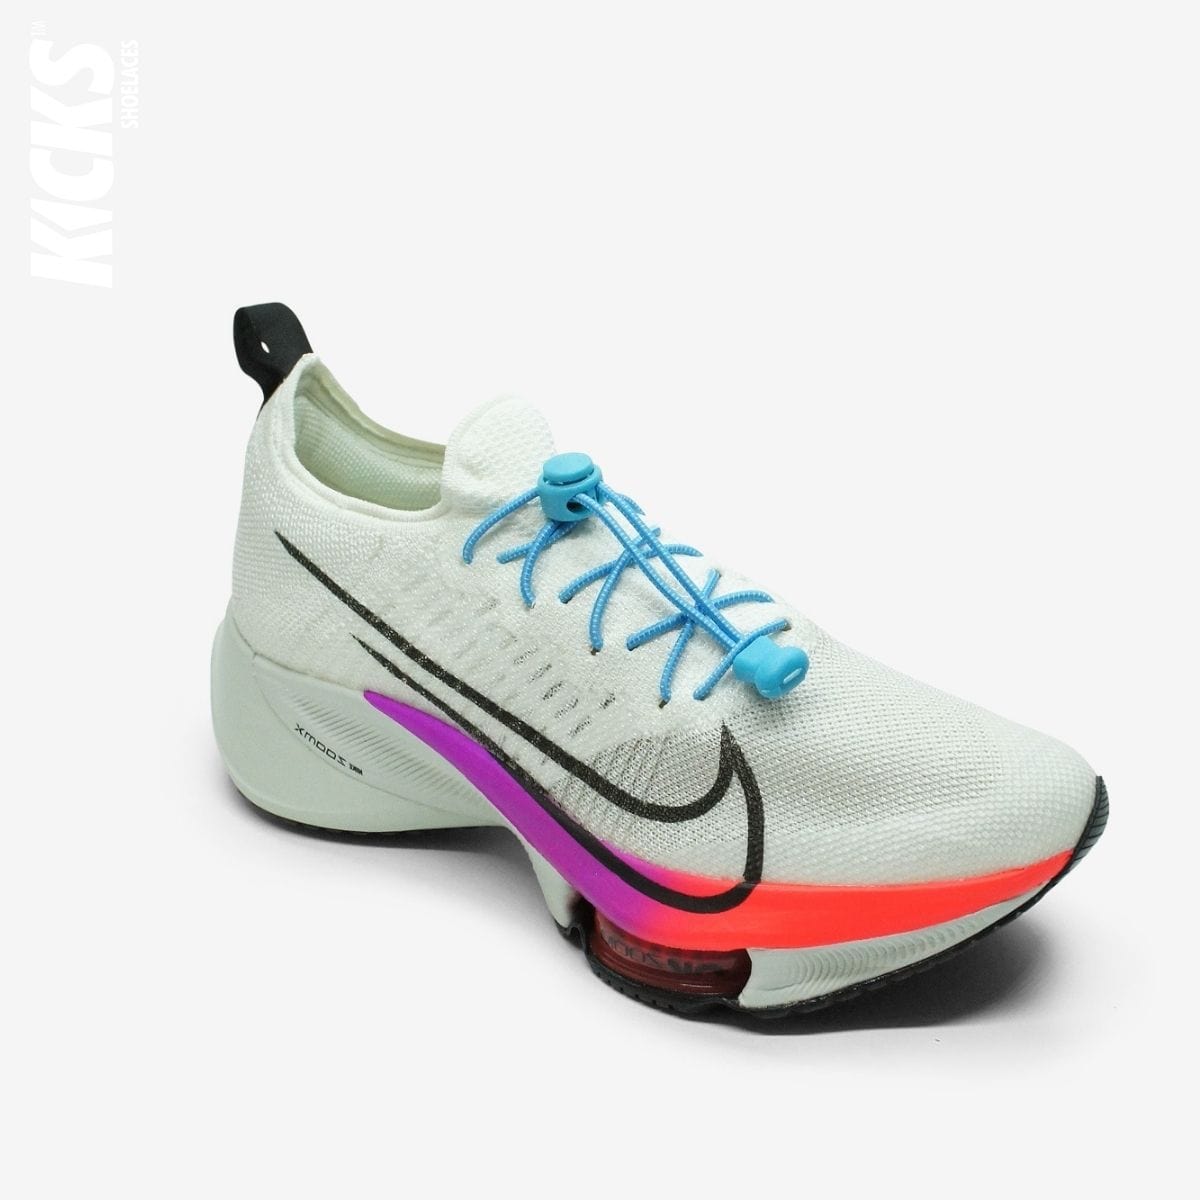 quick-laces-with-sky-blue-elastic-no-tie-shoelaces-on-nike-running-shoe-by-kicks-shoelaces